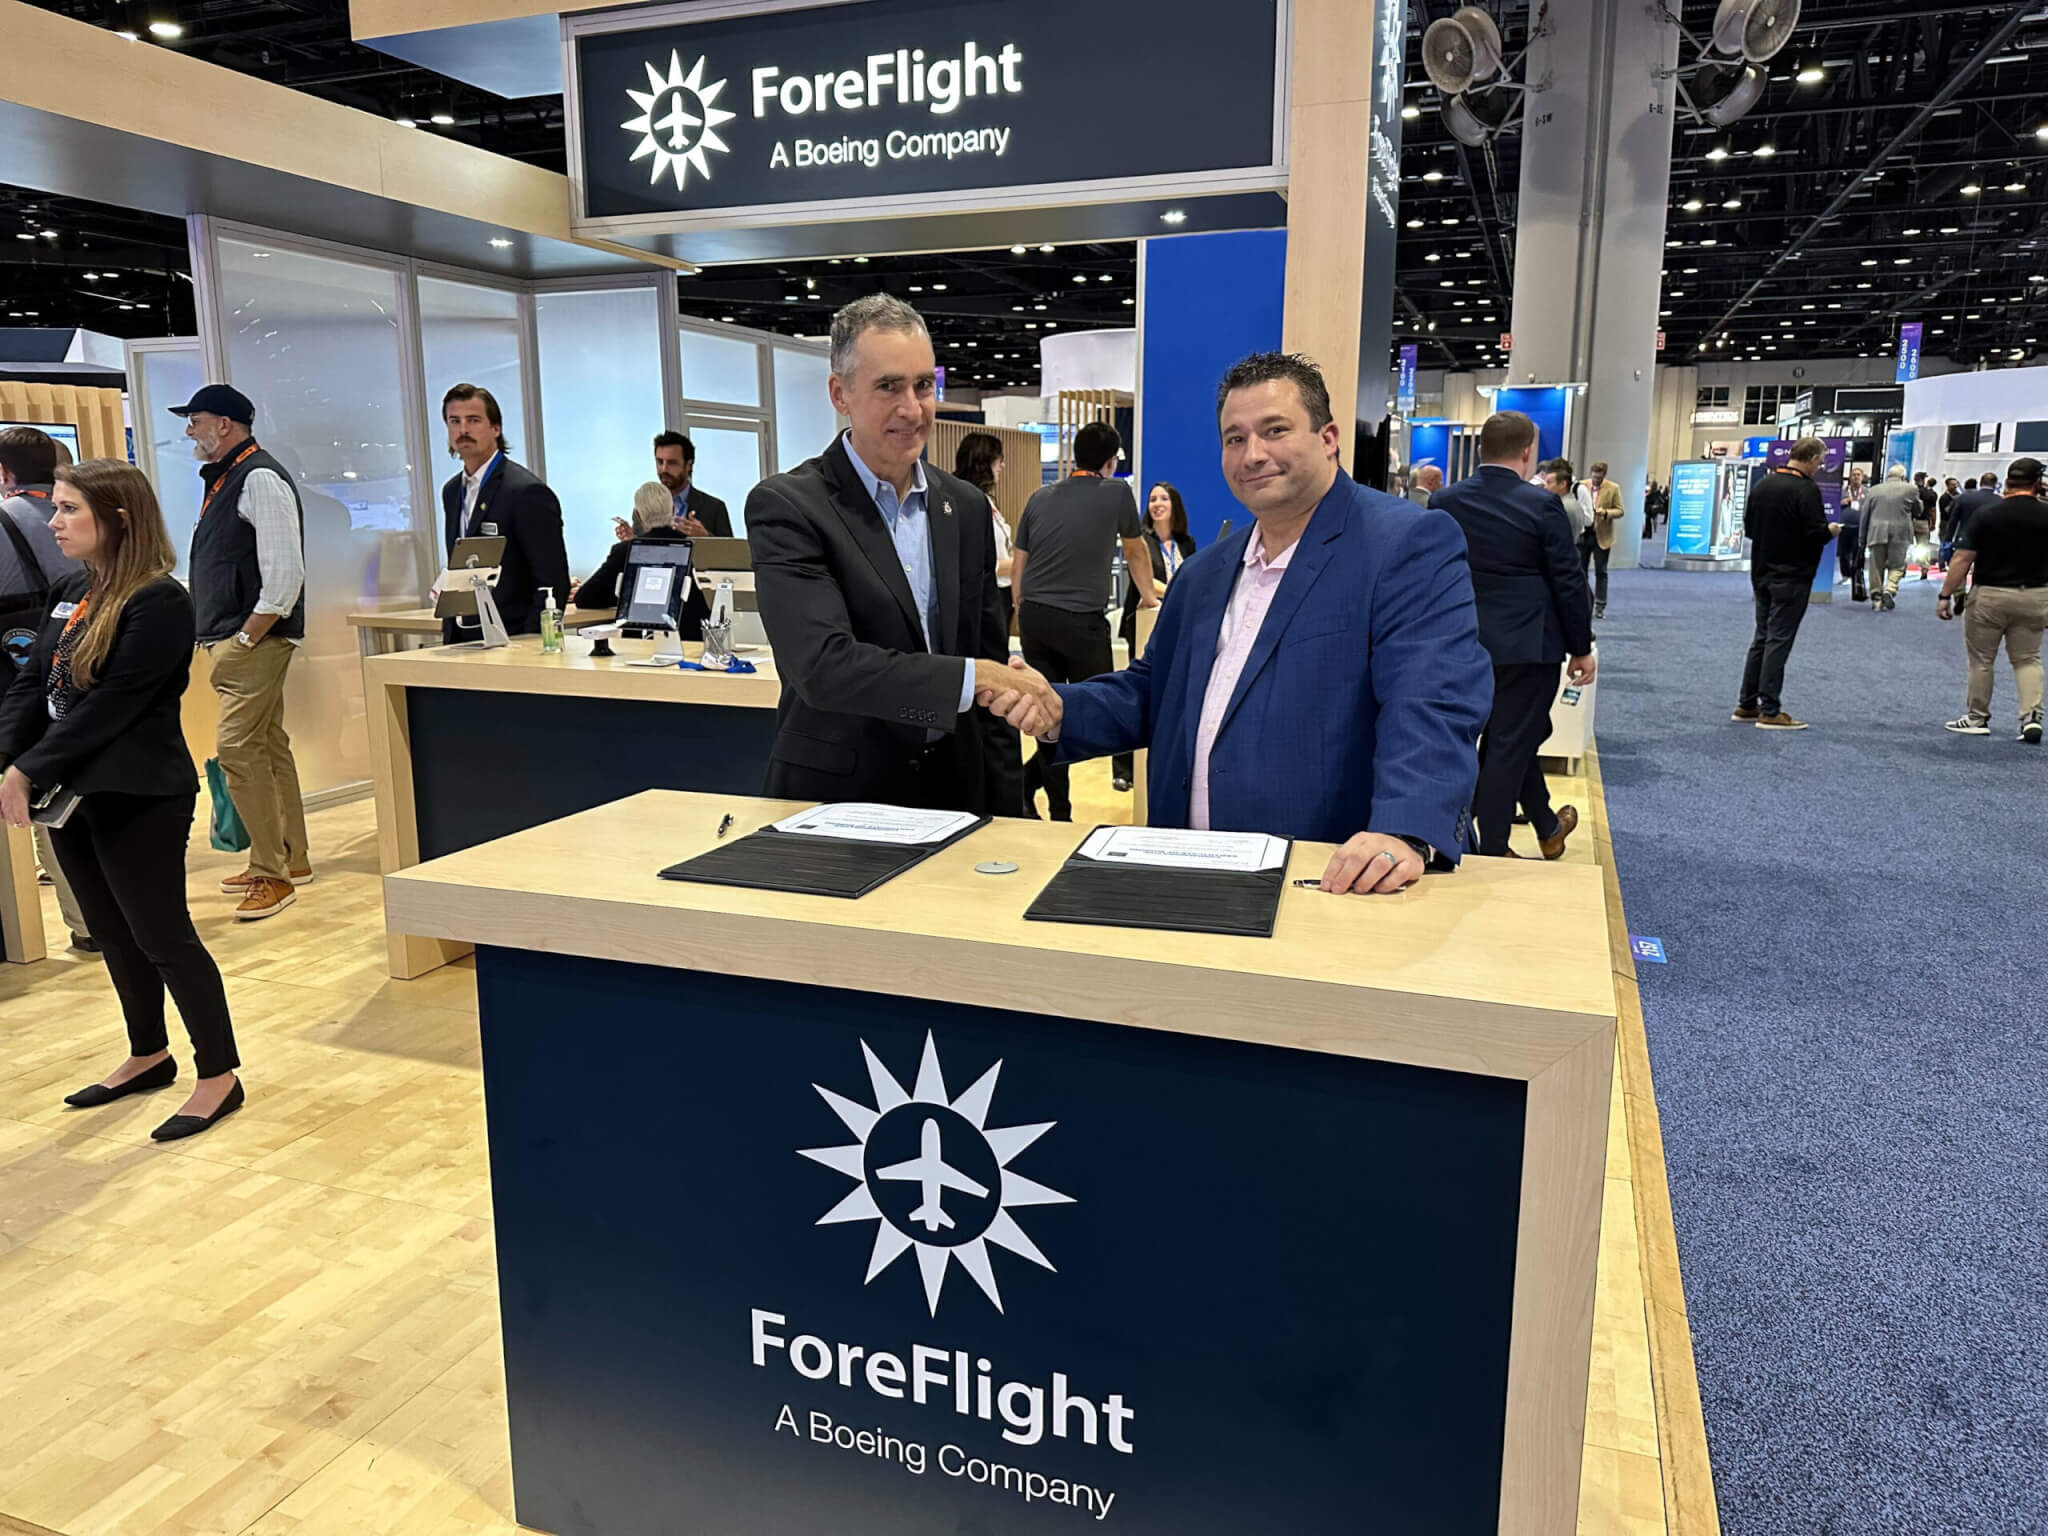 Sun Air Jets Invests in Future with Boeing’s ForeFlight - Sun Air Jets